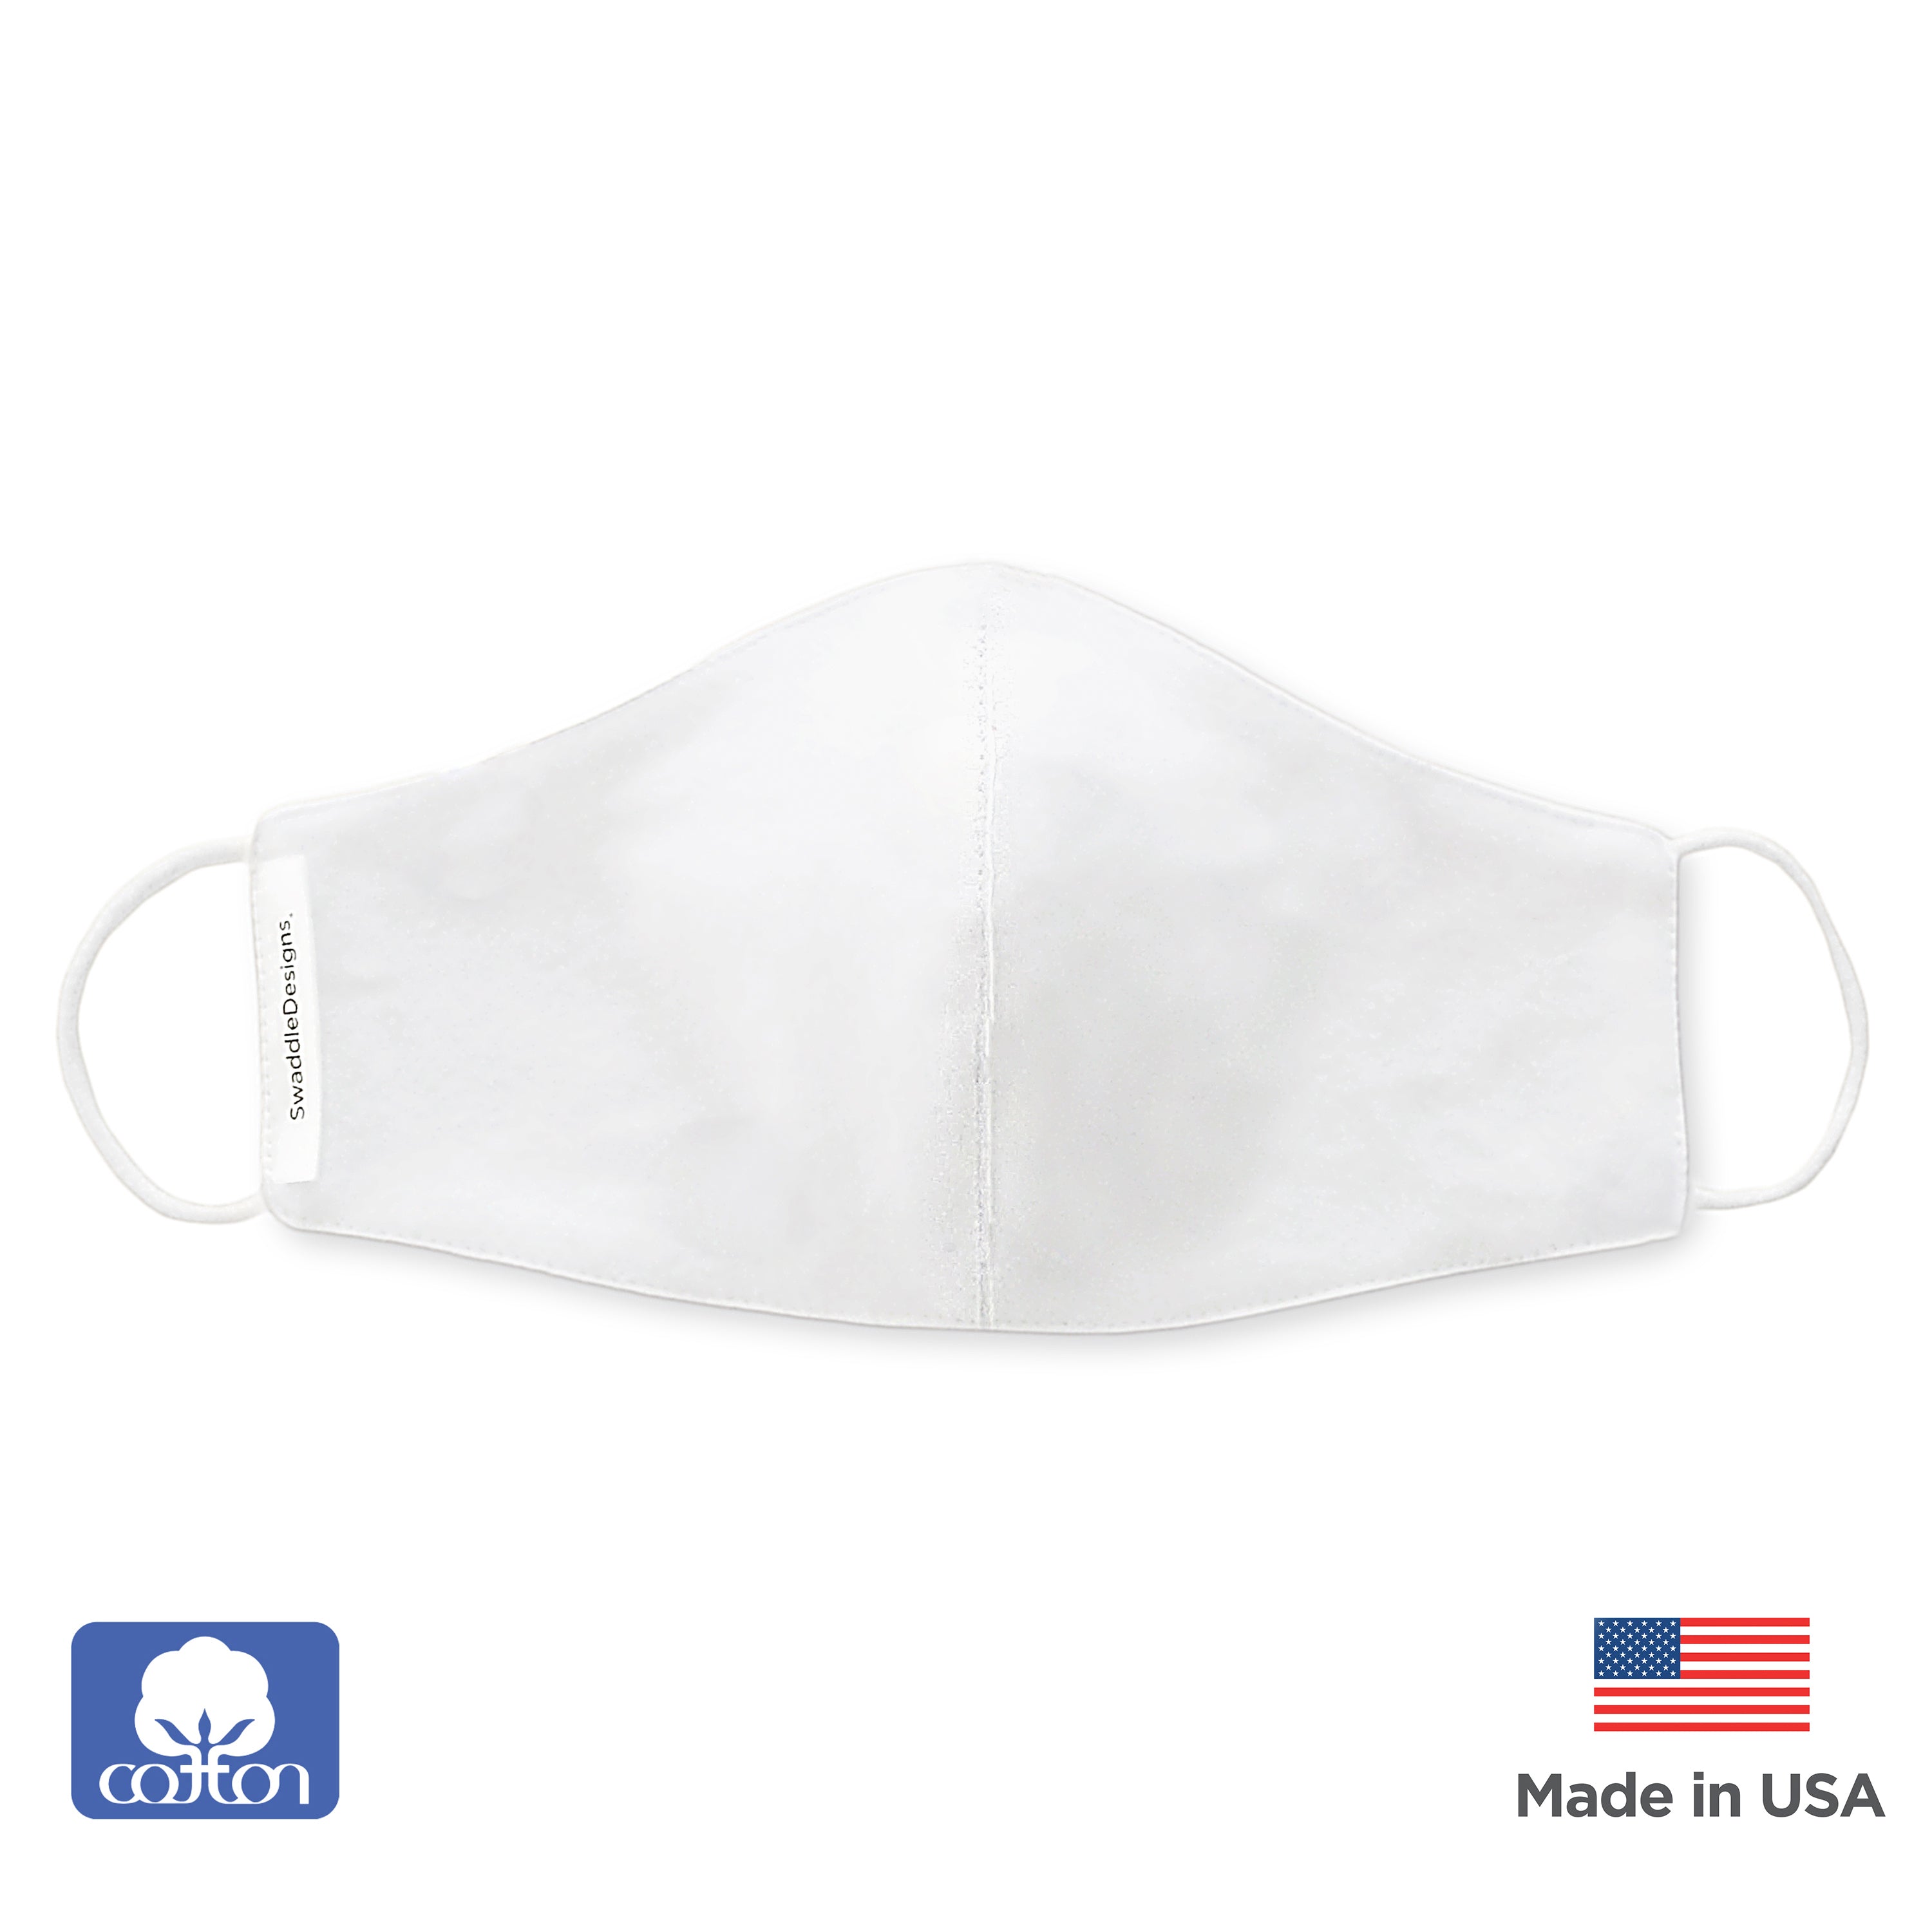 Wholesale Youth Cloth Cotton Reusable Face Mask for Kids in White